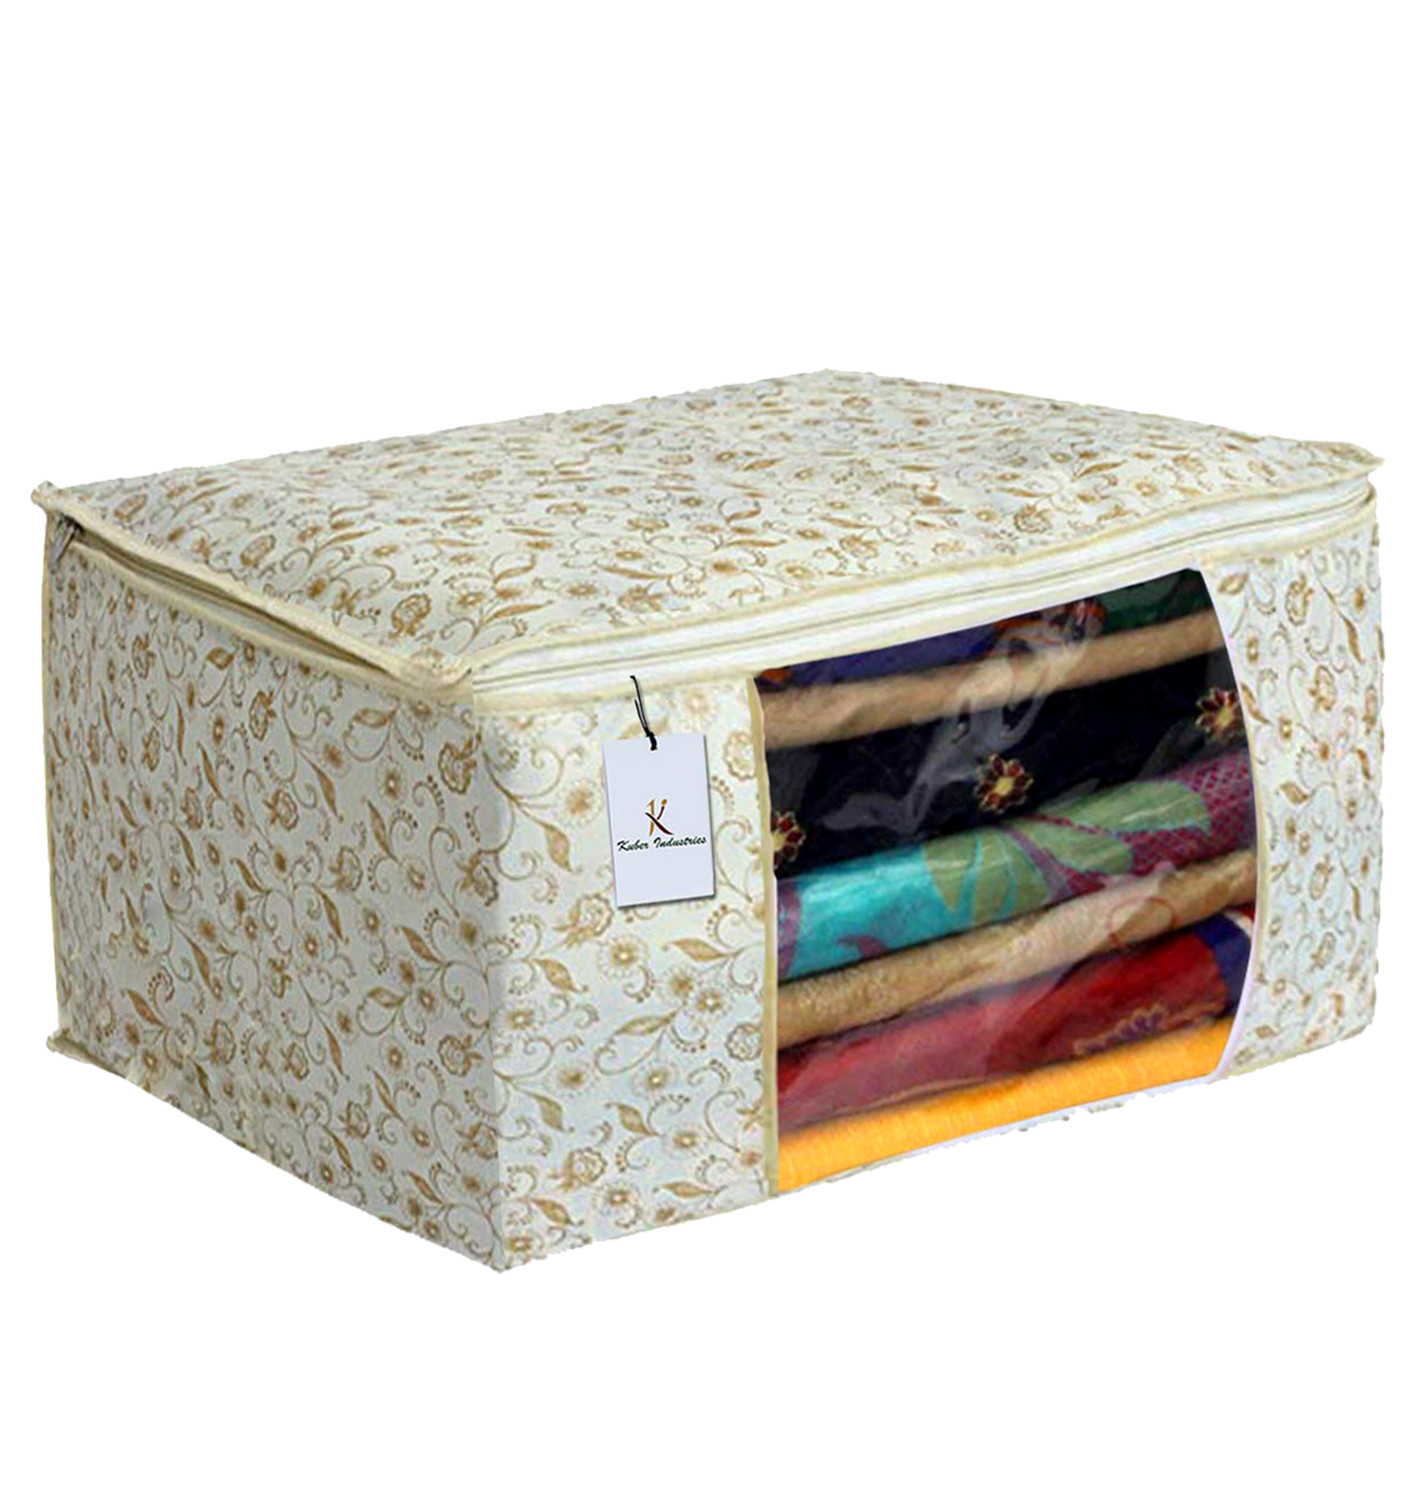 Kuber Industries Metalic Printed Non Woven Saree Cover And Underbed Storage Bag, Storage Organiser, Blanket Cover, Brown & Red  -CTKTC42379